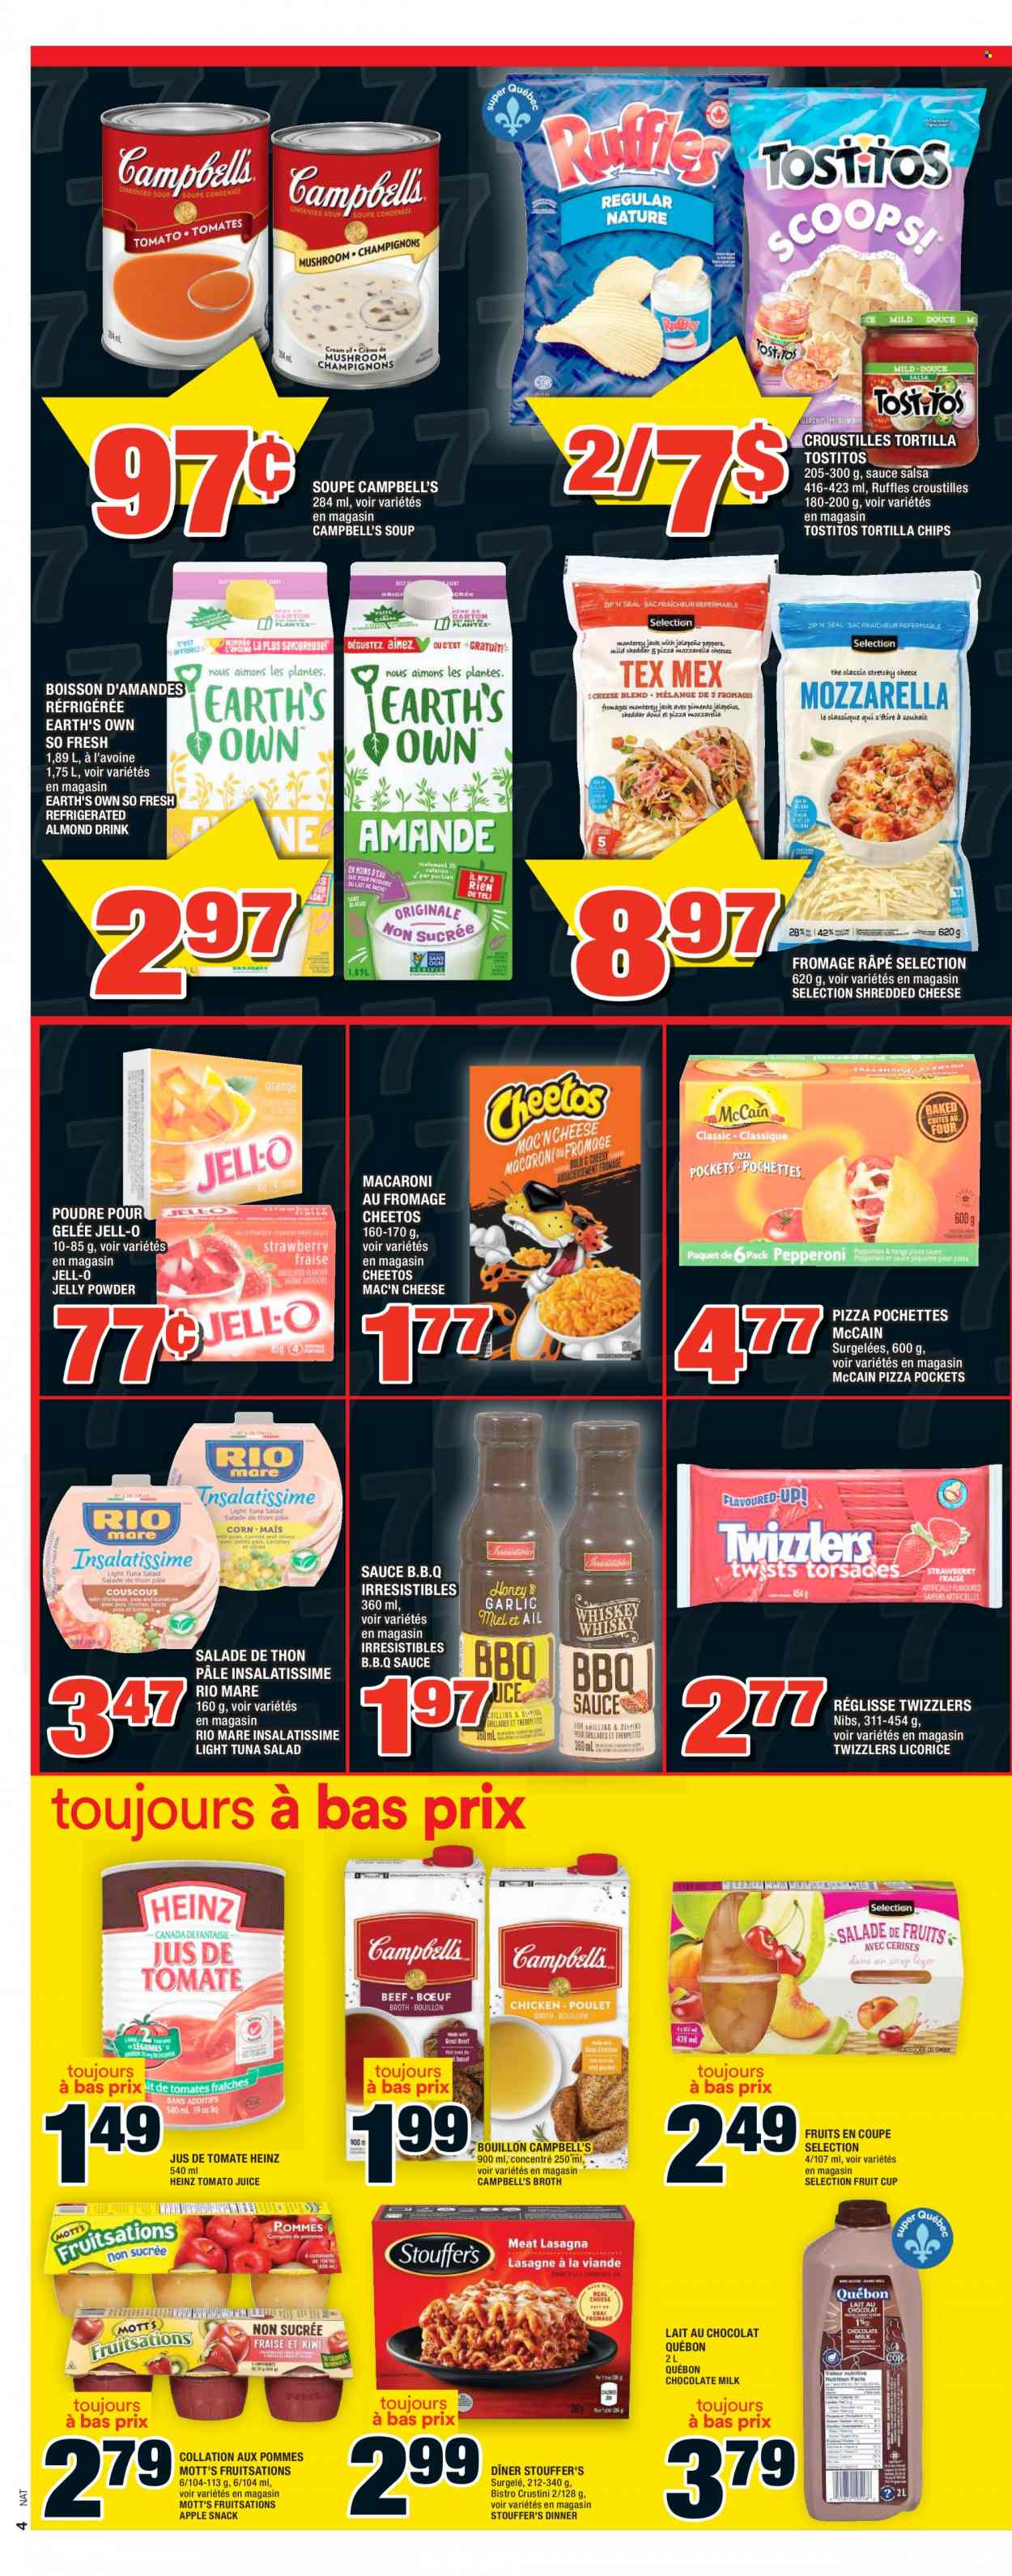 thumbnail - Super C Flyer - May 12, 2022 - May 18, 2022 - Sales products - salad, Mott's, tuna, Campbell's, pizza, macaroni, soup, sauce, tuna salad, shredded cheese, milk, Stouffer's, McCain, milk chocolate, chocolate, snack, jelly, tortilla chips, Cheetos, chips, Ruffles, Tostitos, bouillon, Jell-O, broth, light tuna, salsa, tomato juice, juice, Heinz. Page 5.